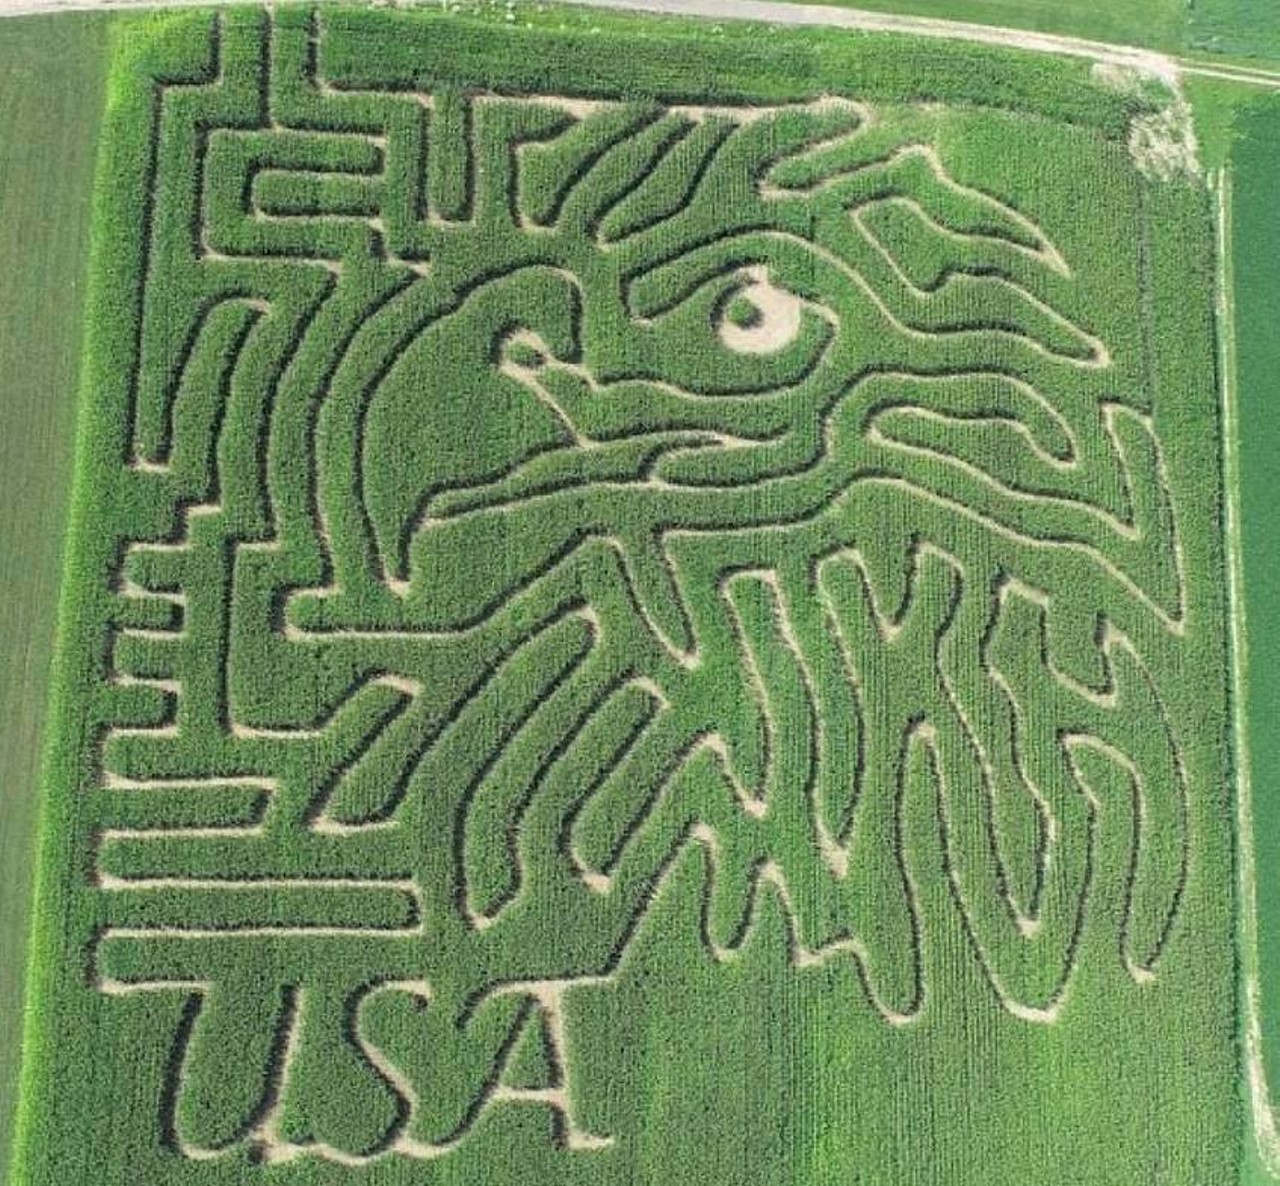 Derthick&#146;s Corn Maze and Farm Experience
5182 State Route 82, Mantua
Weave your way through the corn maze. In the Farm Experience, families can pet the animals, ride a pony, and ride the bucking cow train. Visit the u-pick pumpkin patch to choose your perfect pumpkin from the field. There&#146;s also a zip-line! Open Friday (6 p.m. to 11 p.m), Saturday (1 p.m. to 11 p.m.) and Sunday (12 p.m. to 6 p.m.) through October.
Photo via Derthick&#146;s Farm/Facebook